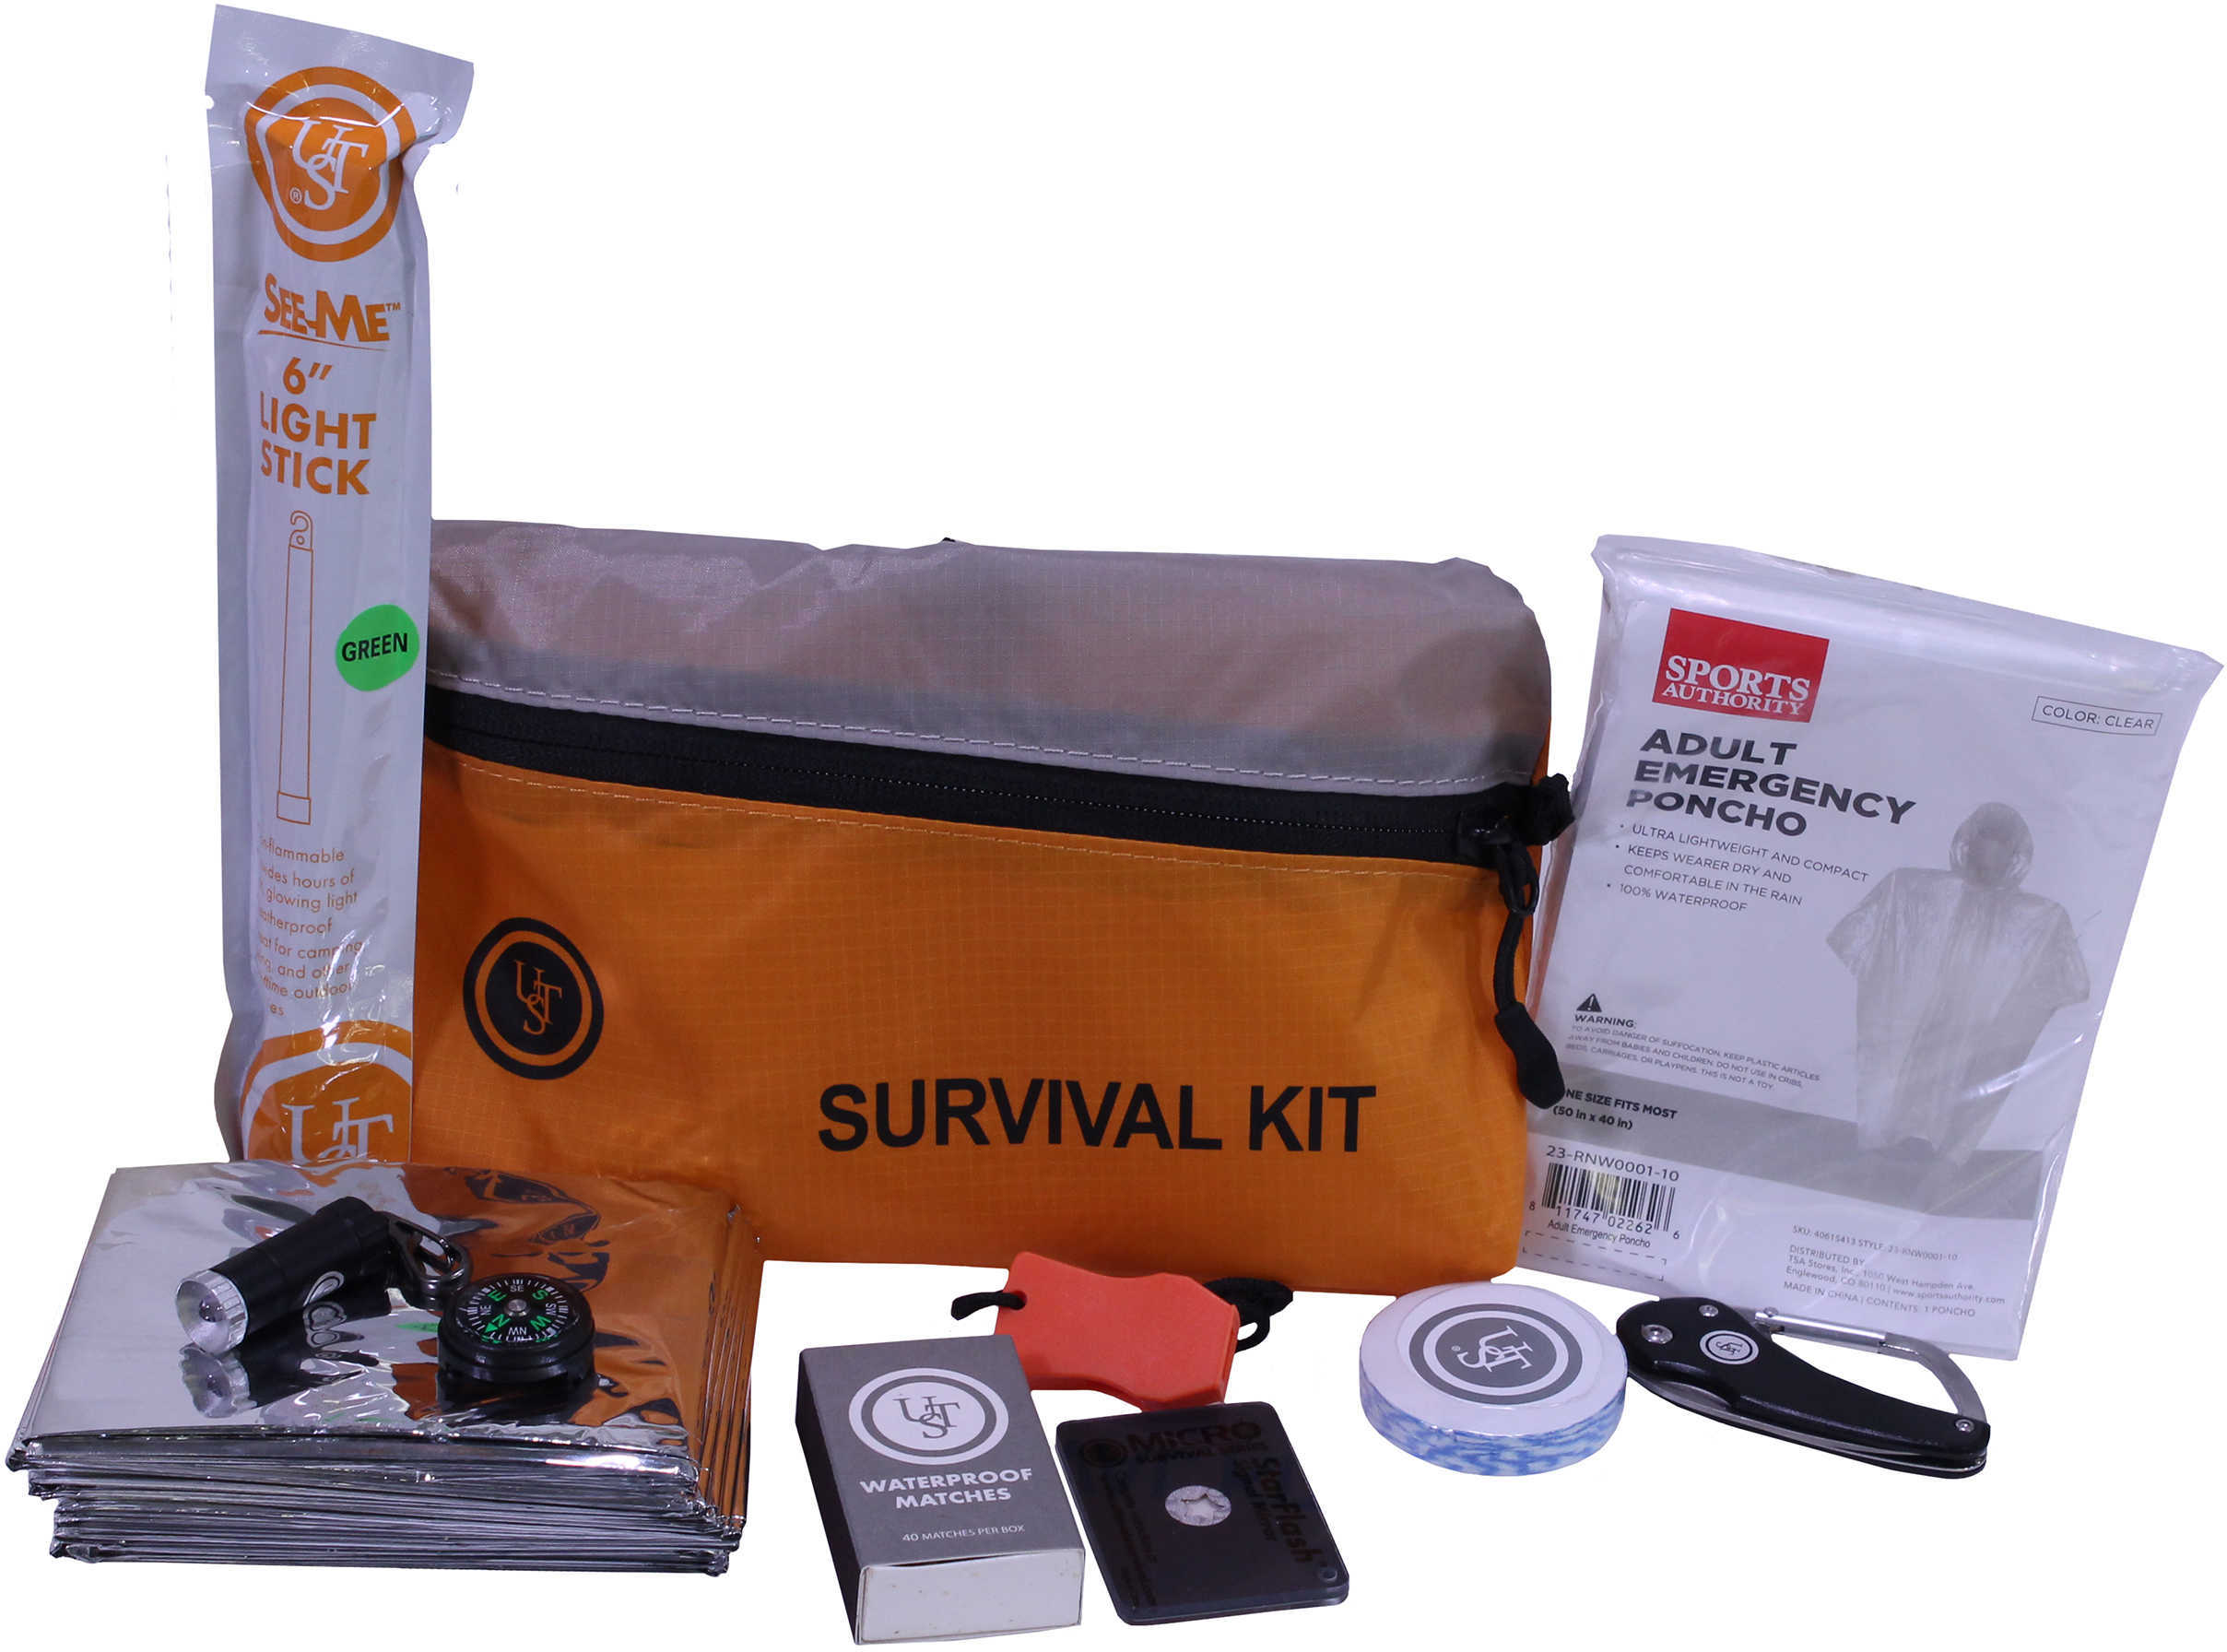 UST - Ultimate Survival Technologies Featherlite Kit 2.0 Includes Compass Emergency Blanket Poncho Whistle